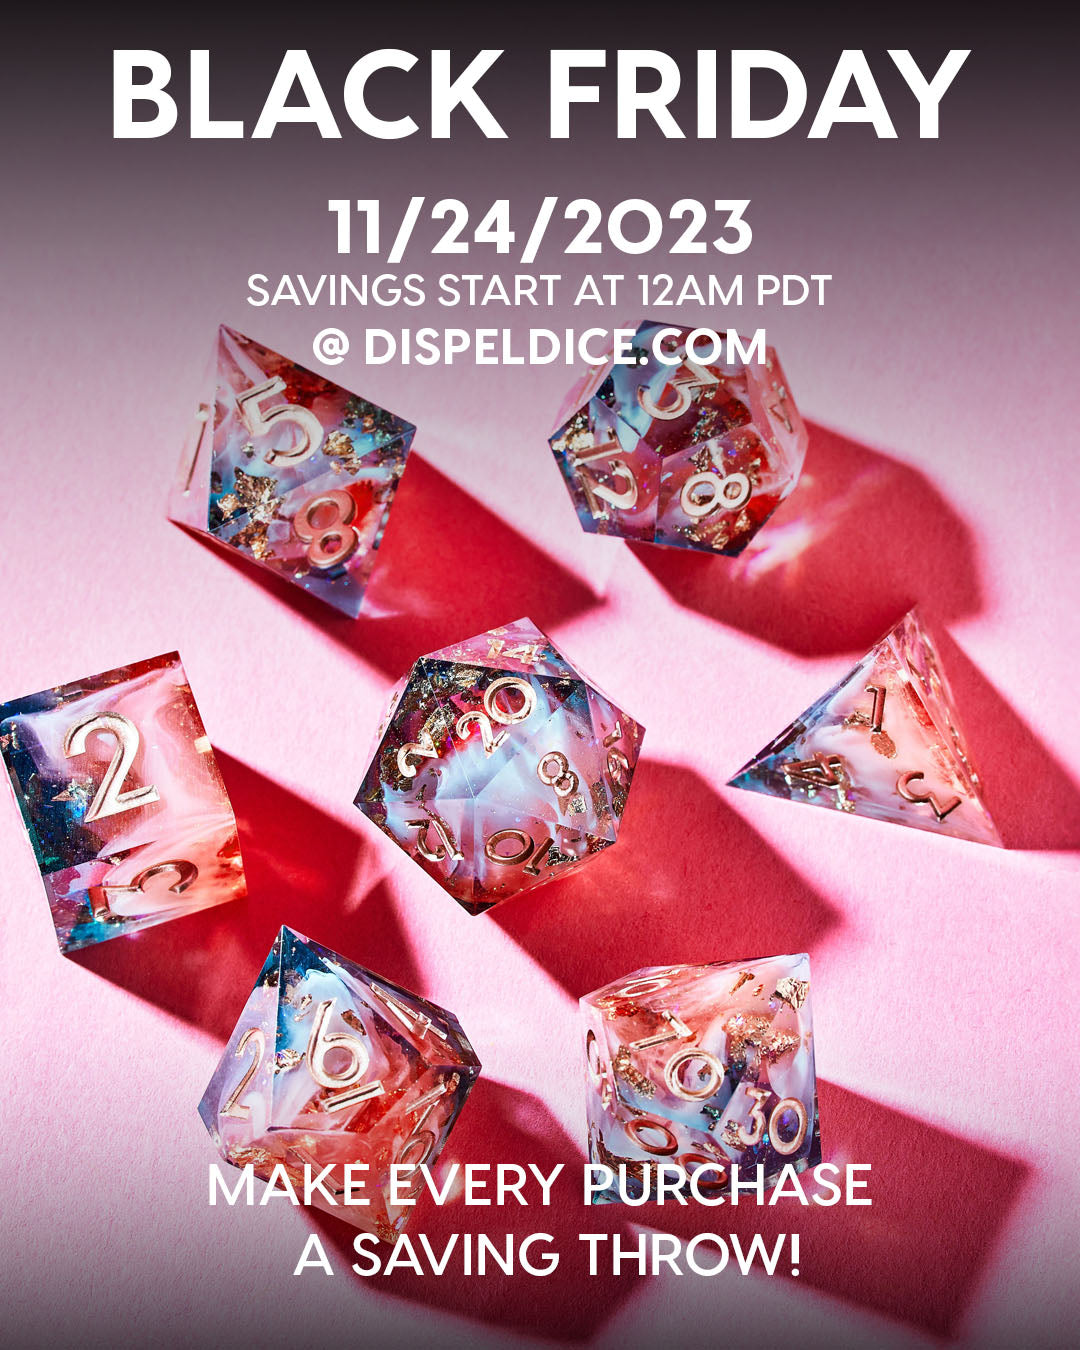 Save BIG this weekend with Dispel Dice's Black Friday Deals!